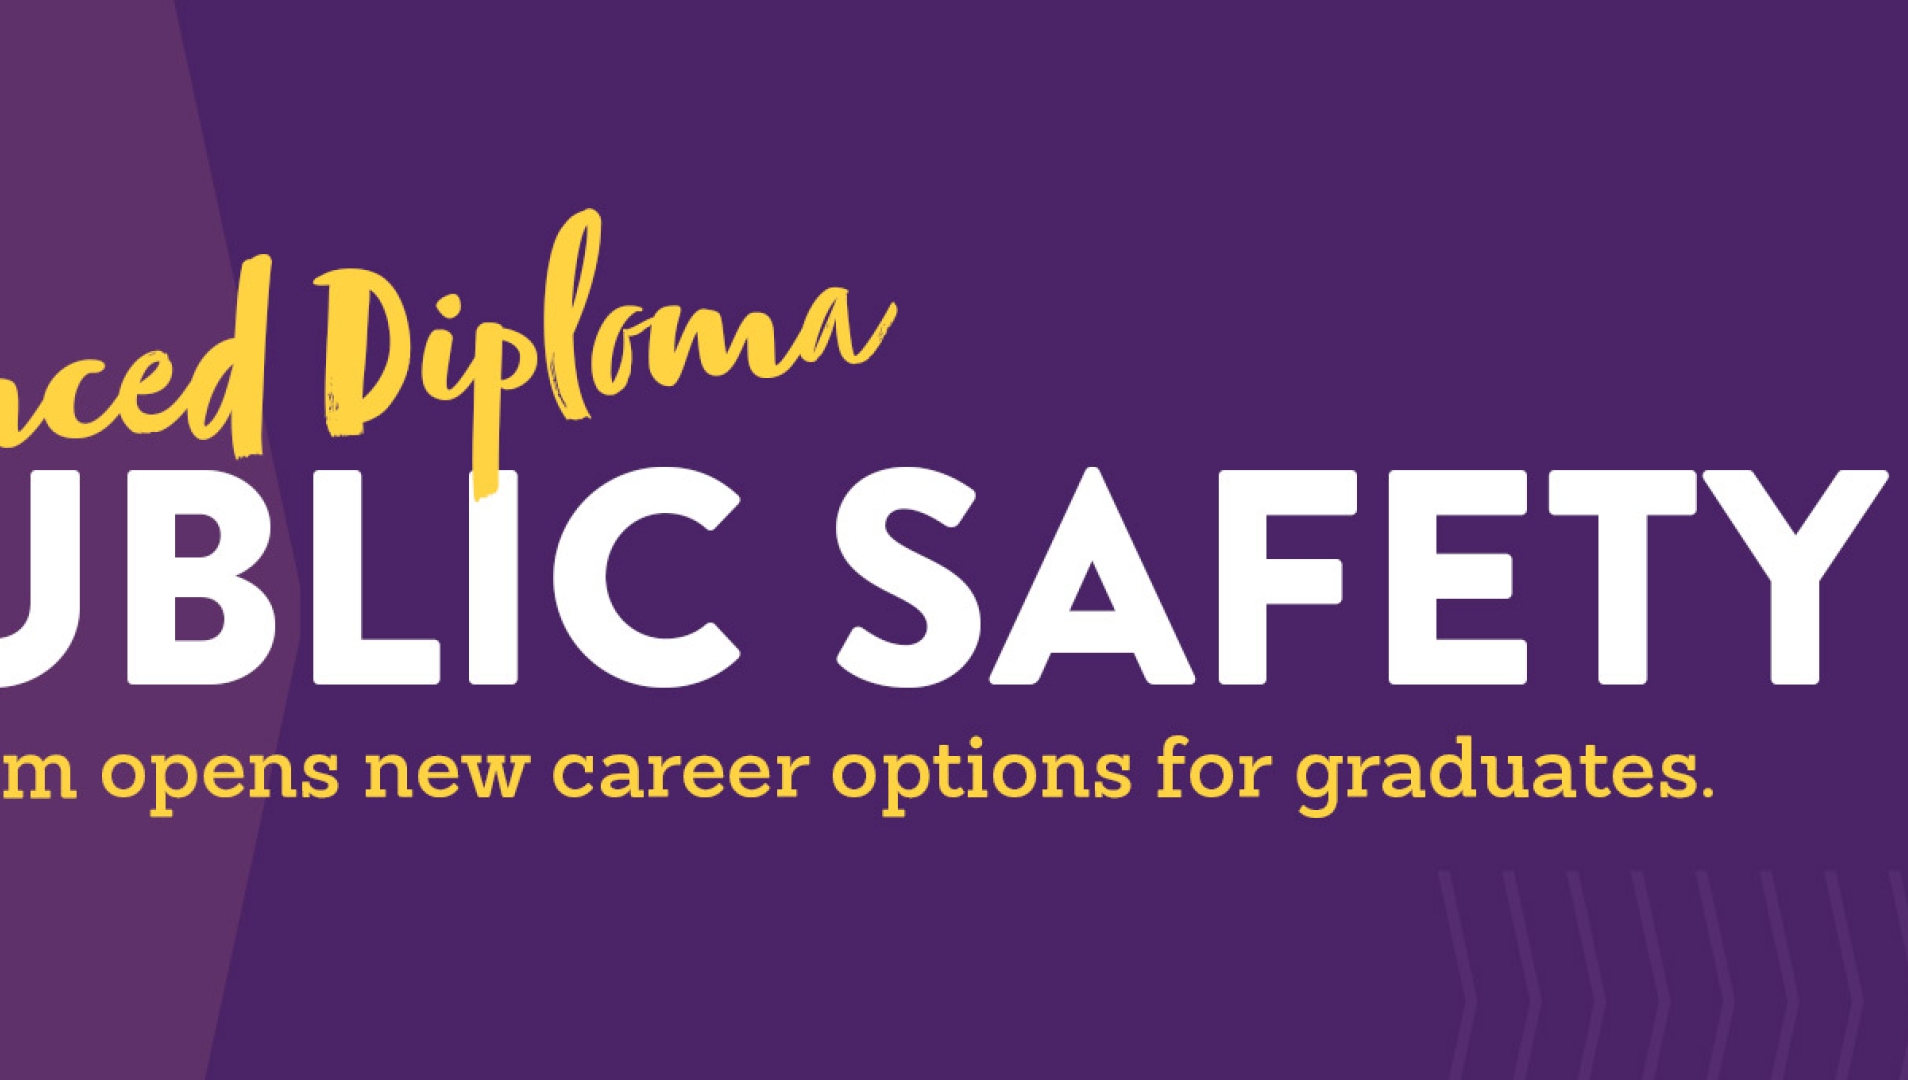 Public Safety Advanced Diploma opens new career options, written on a purple background.